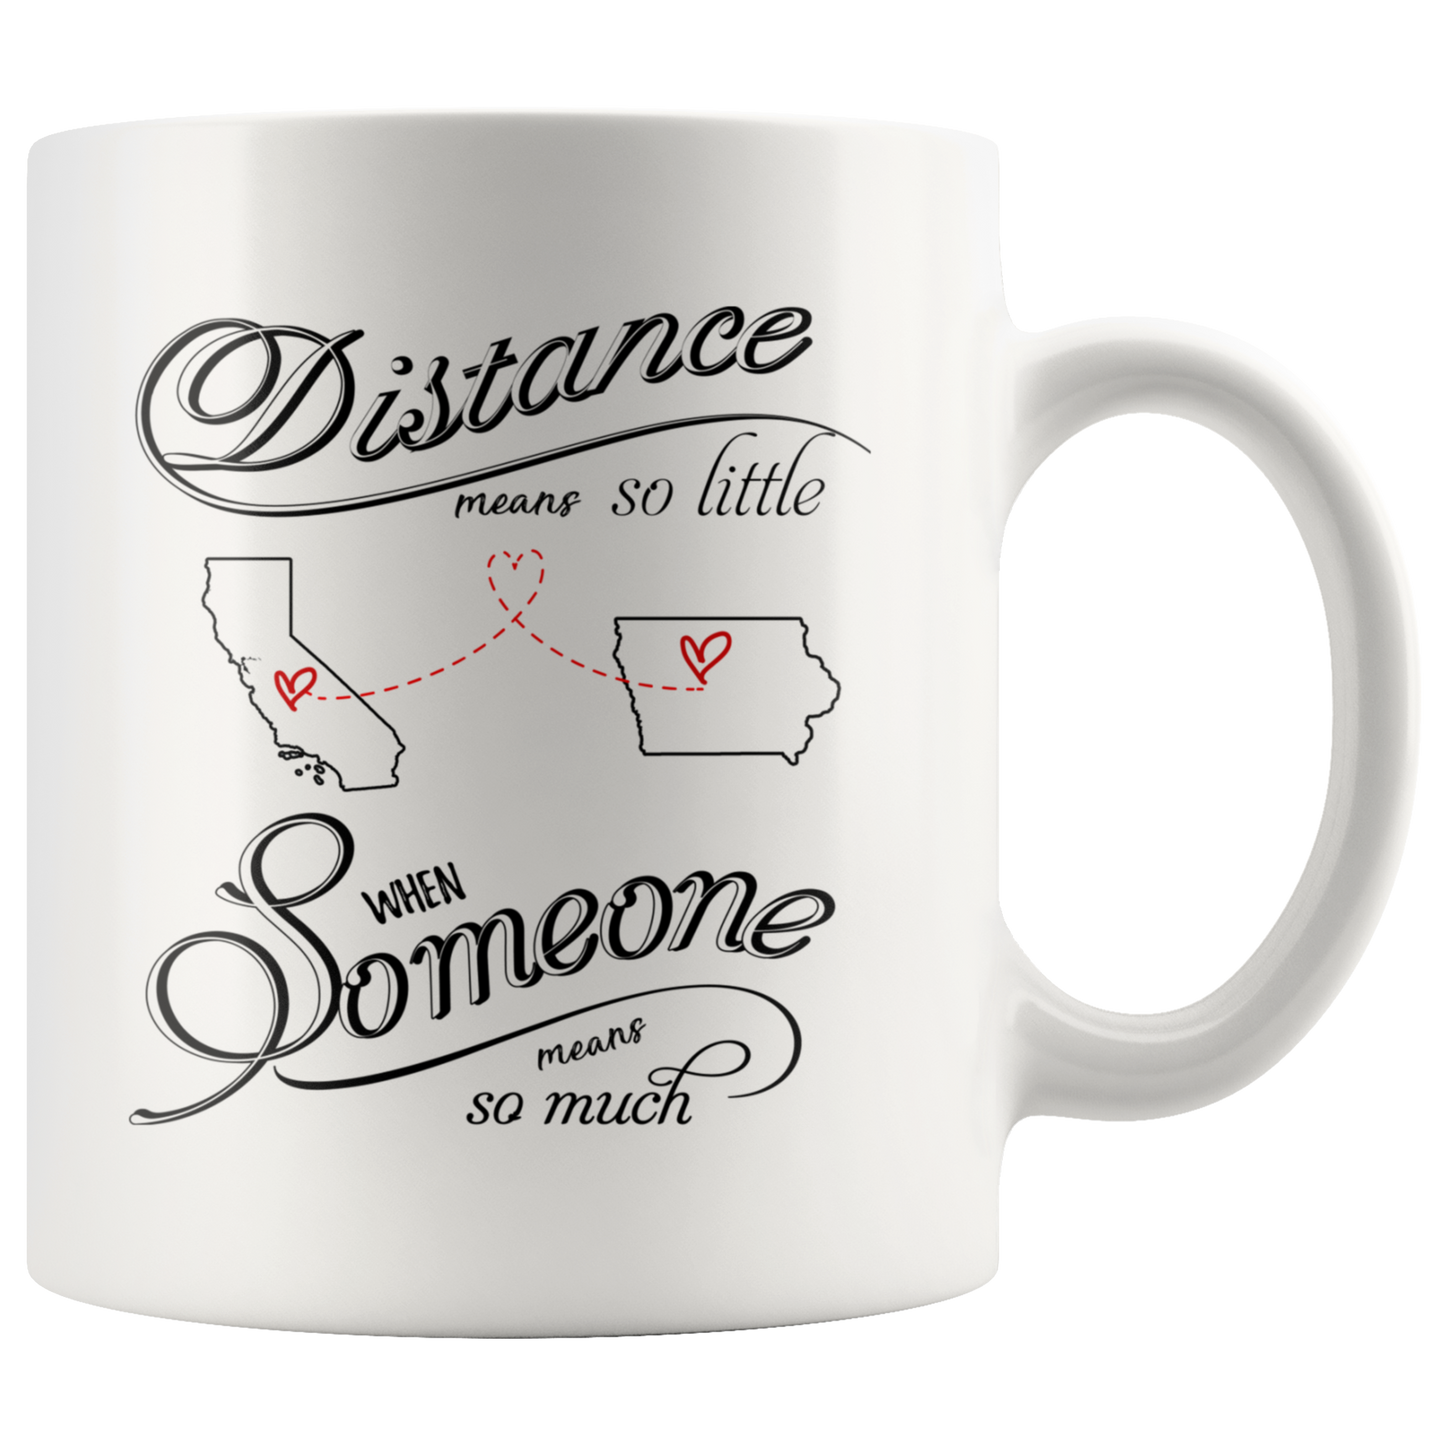 M-20484776-sp-23090 - Mothers Day Coffee Mug California Iowa Distance Means So Lit